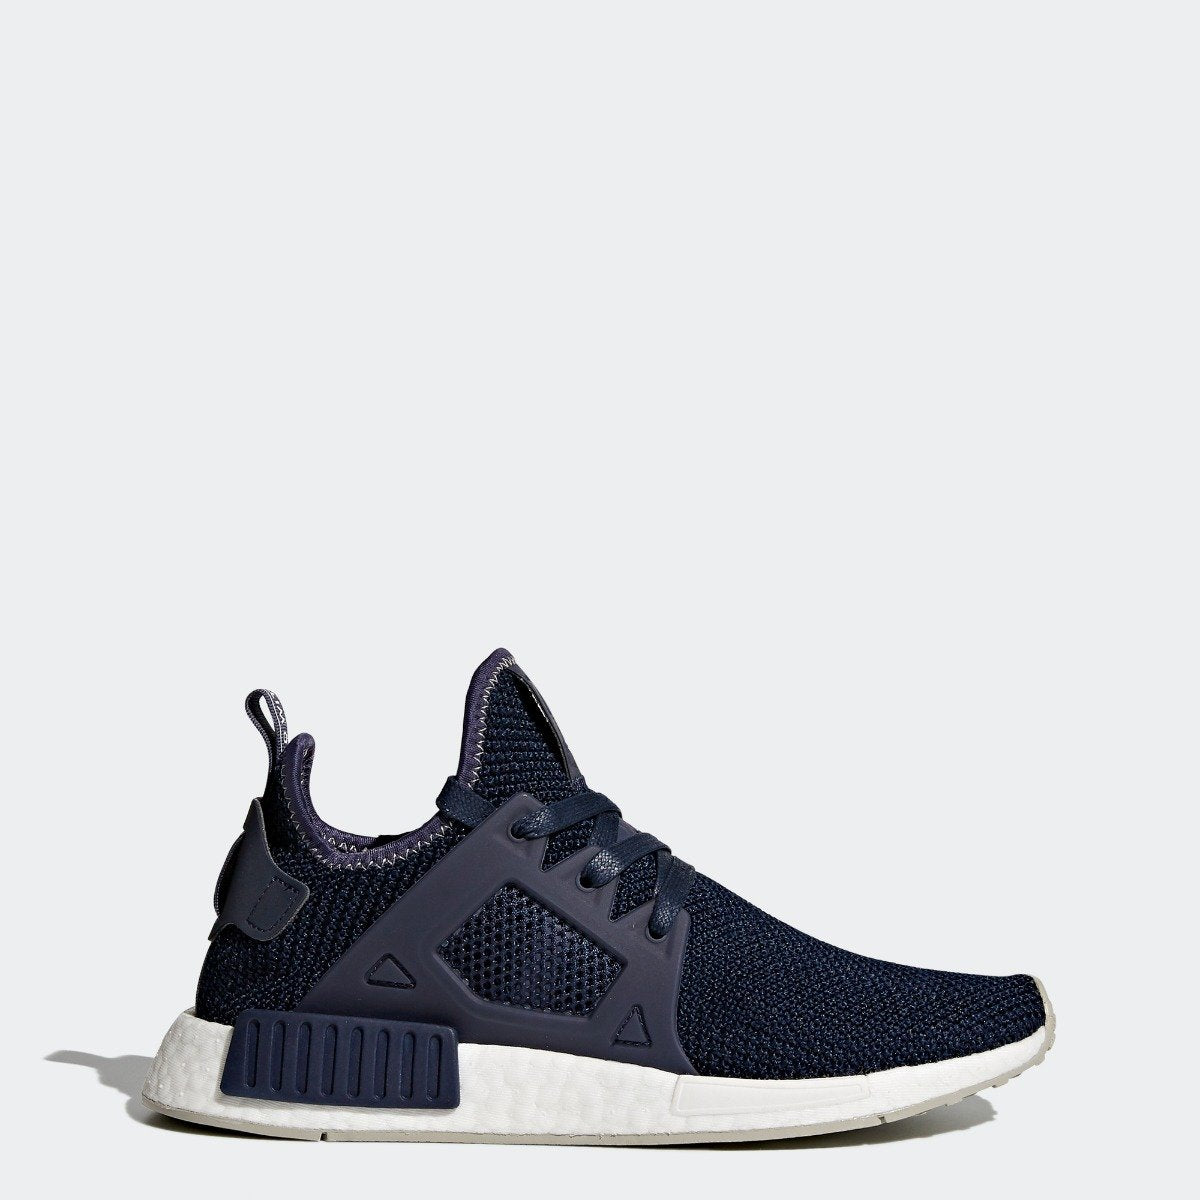 adidas nmd xr1 shoes